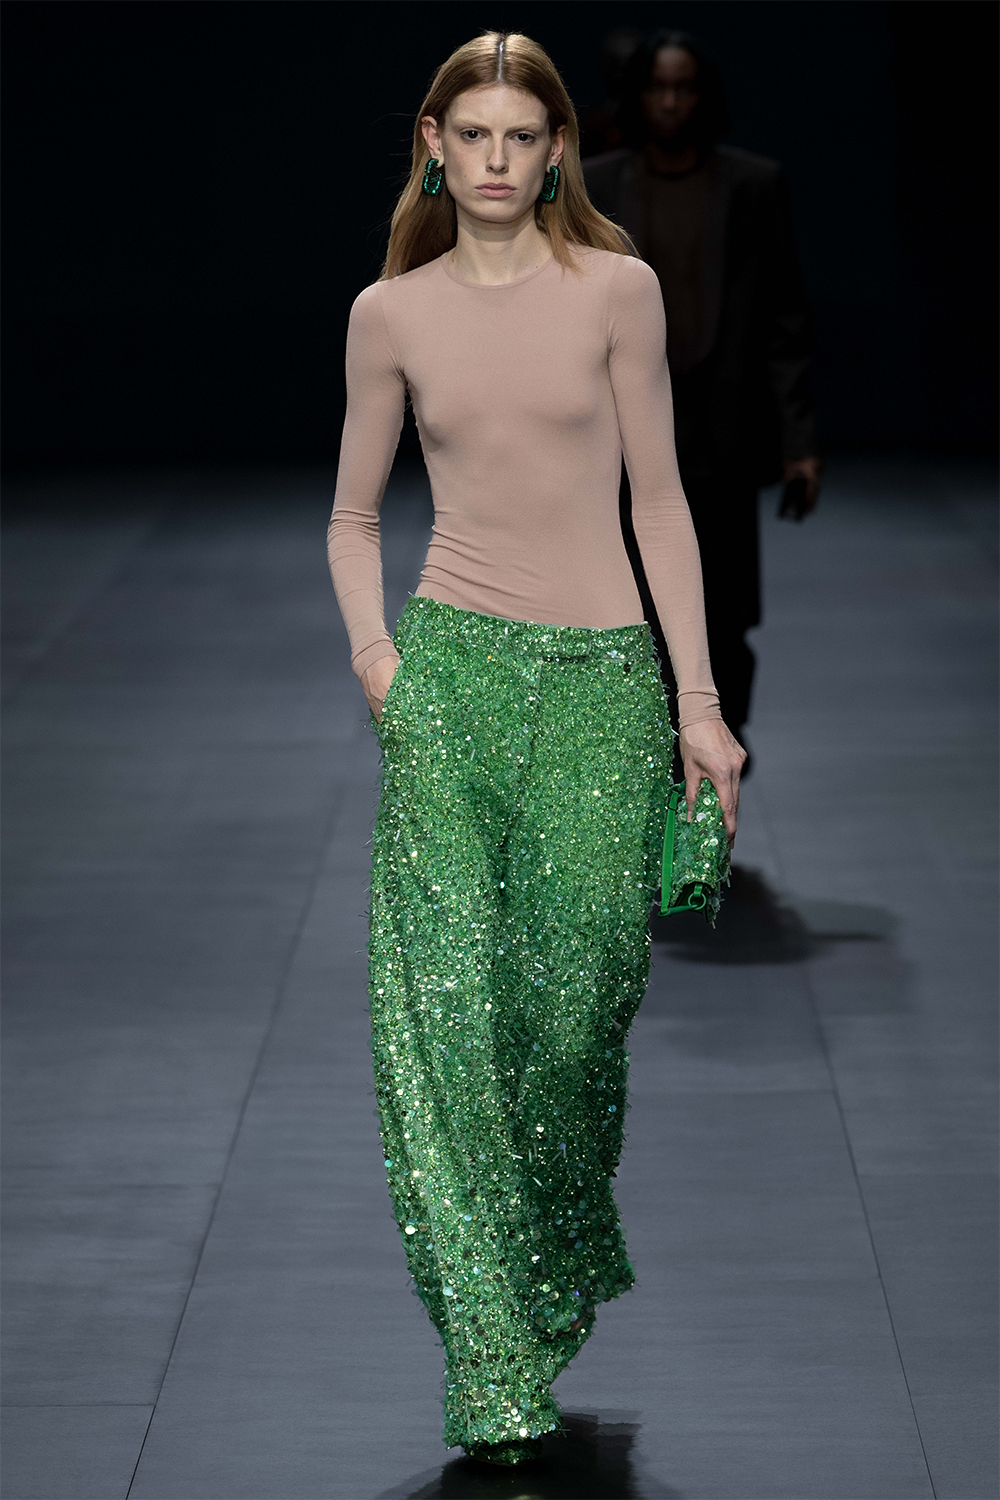 Net-a-Porter spring 2023 trends: shimmer and shine